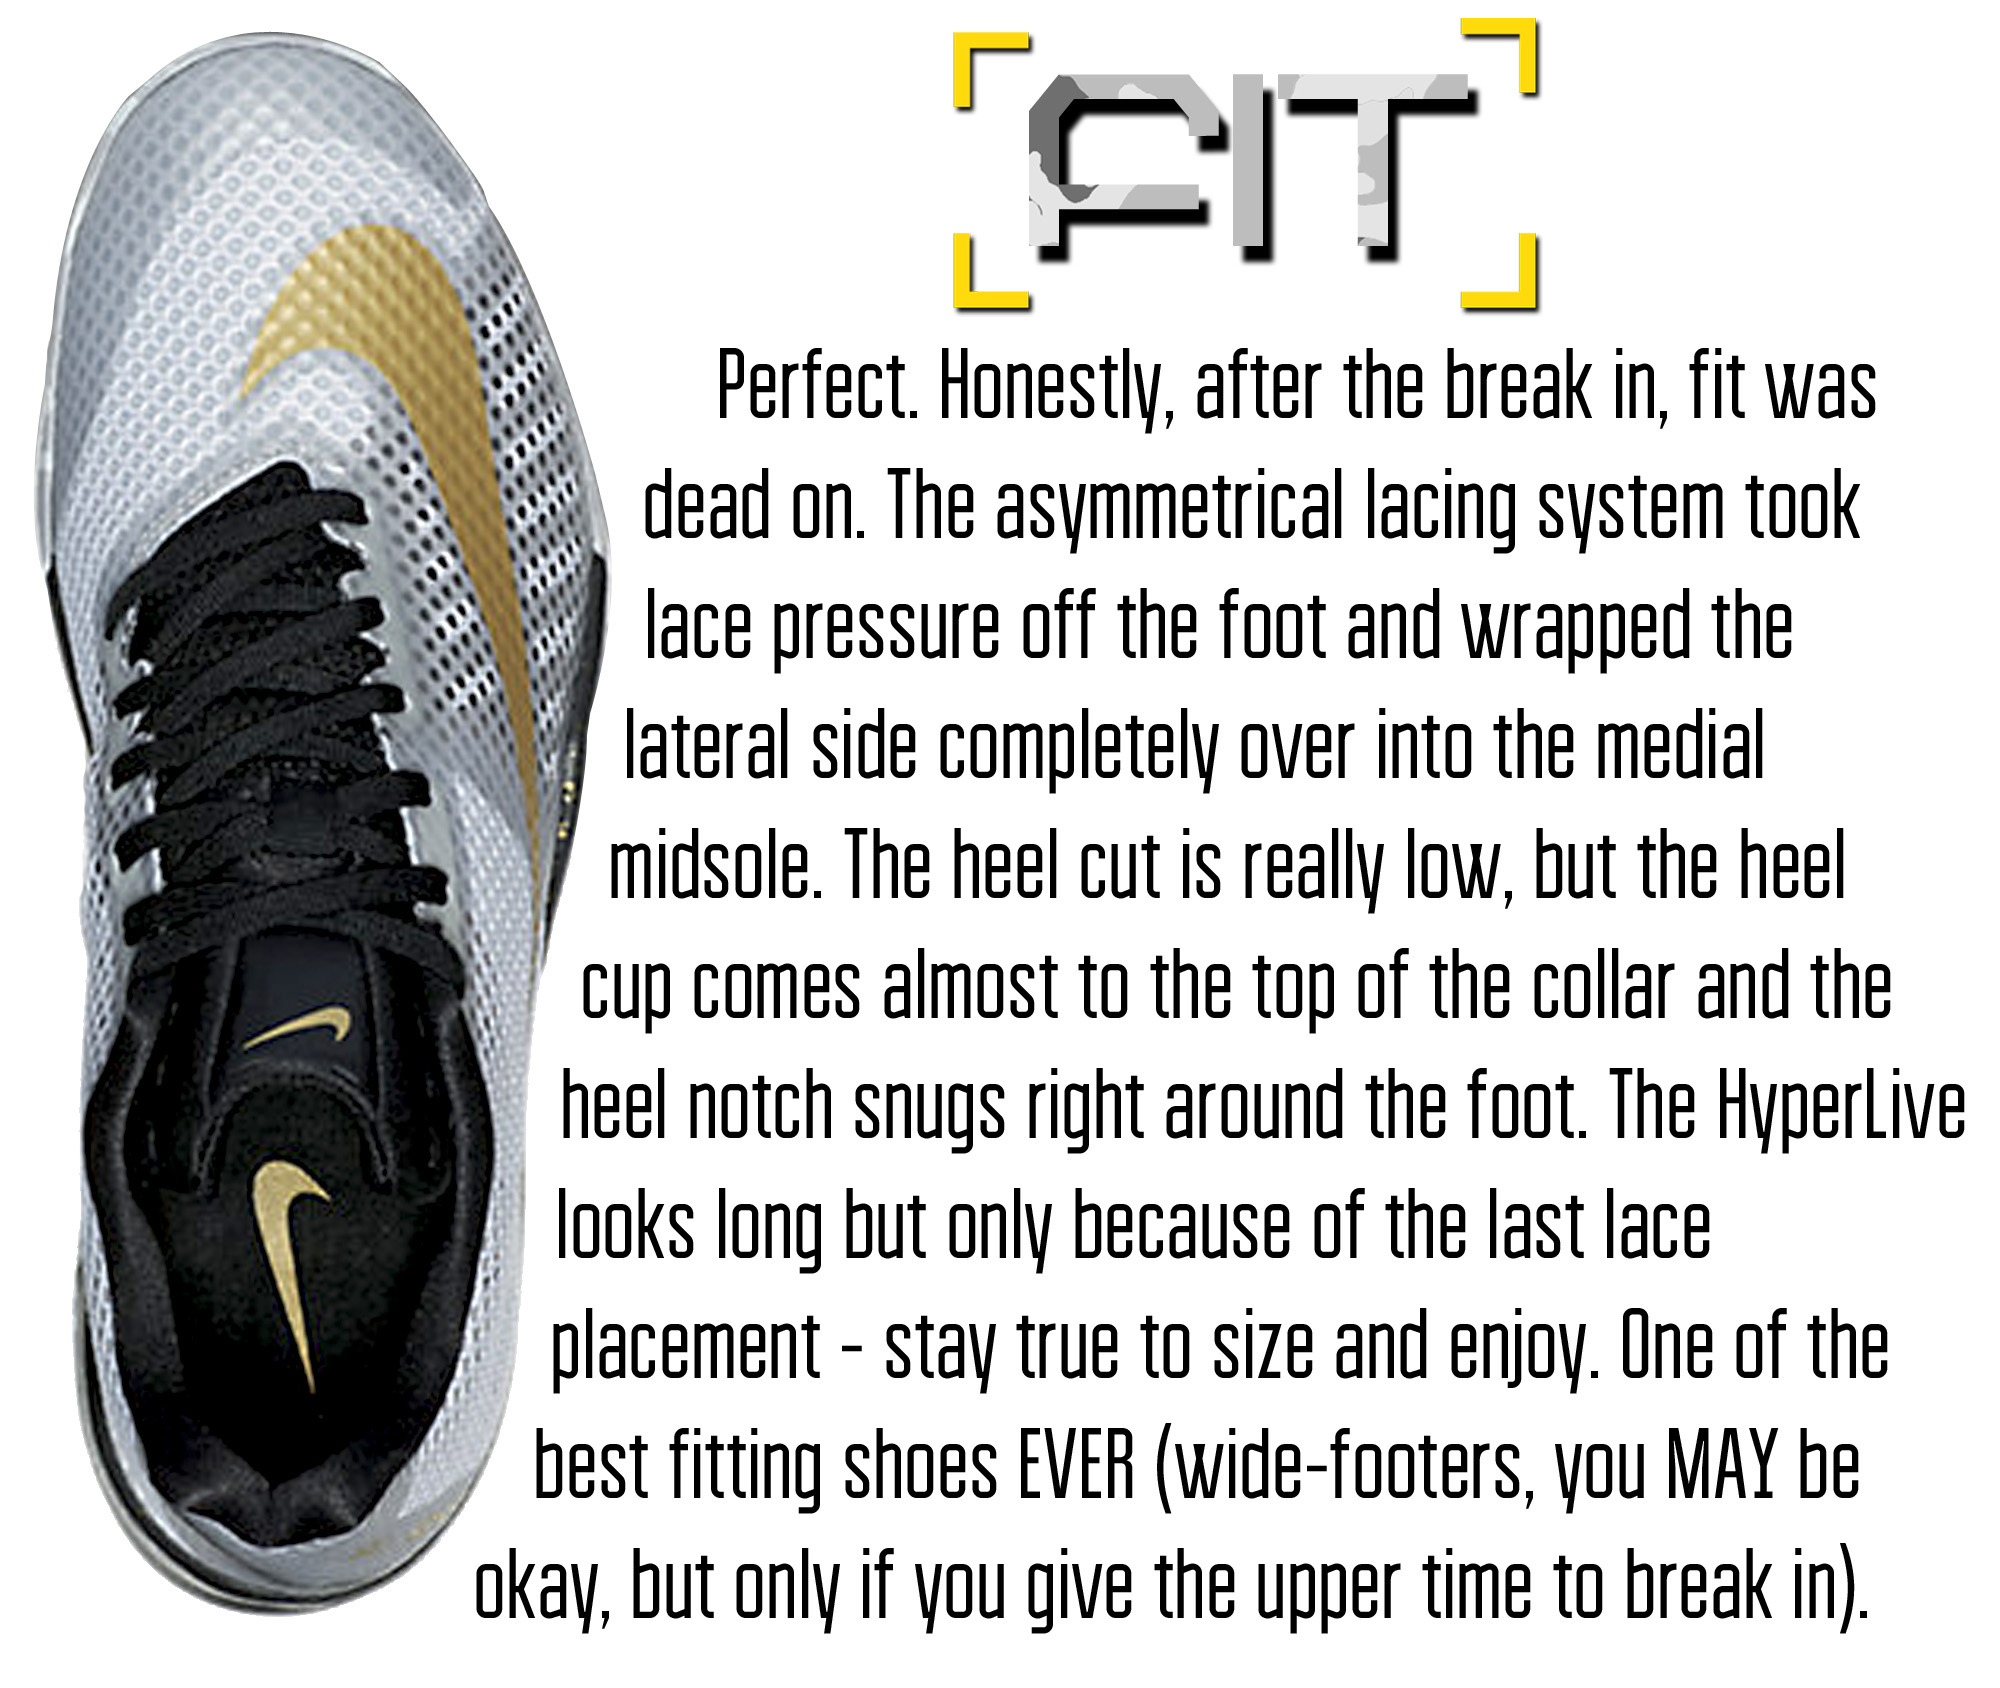 Nike hyperlive performance review 4